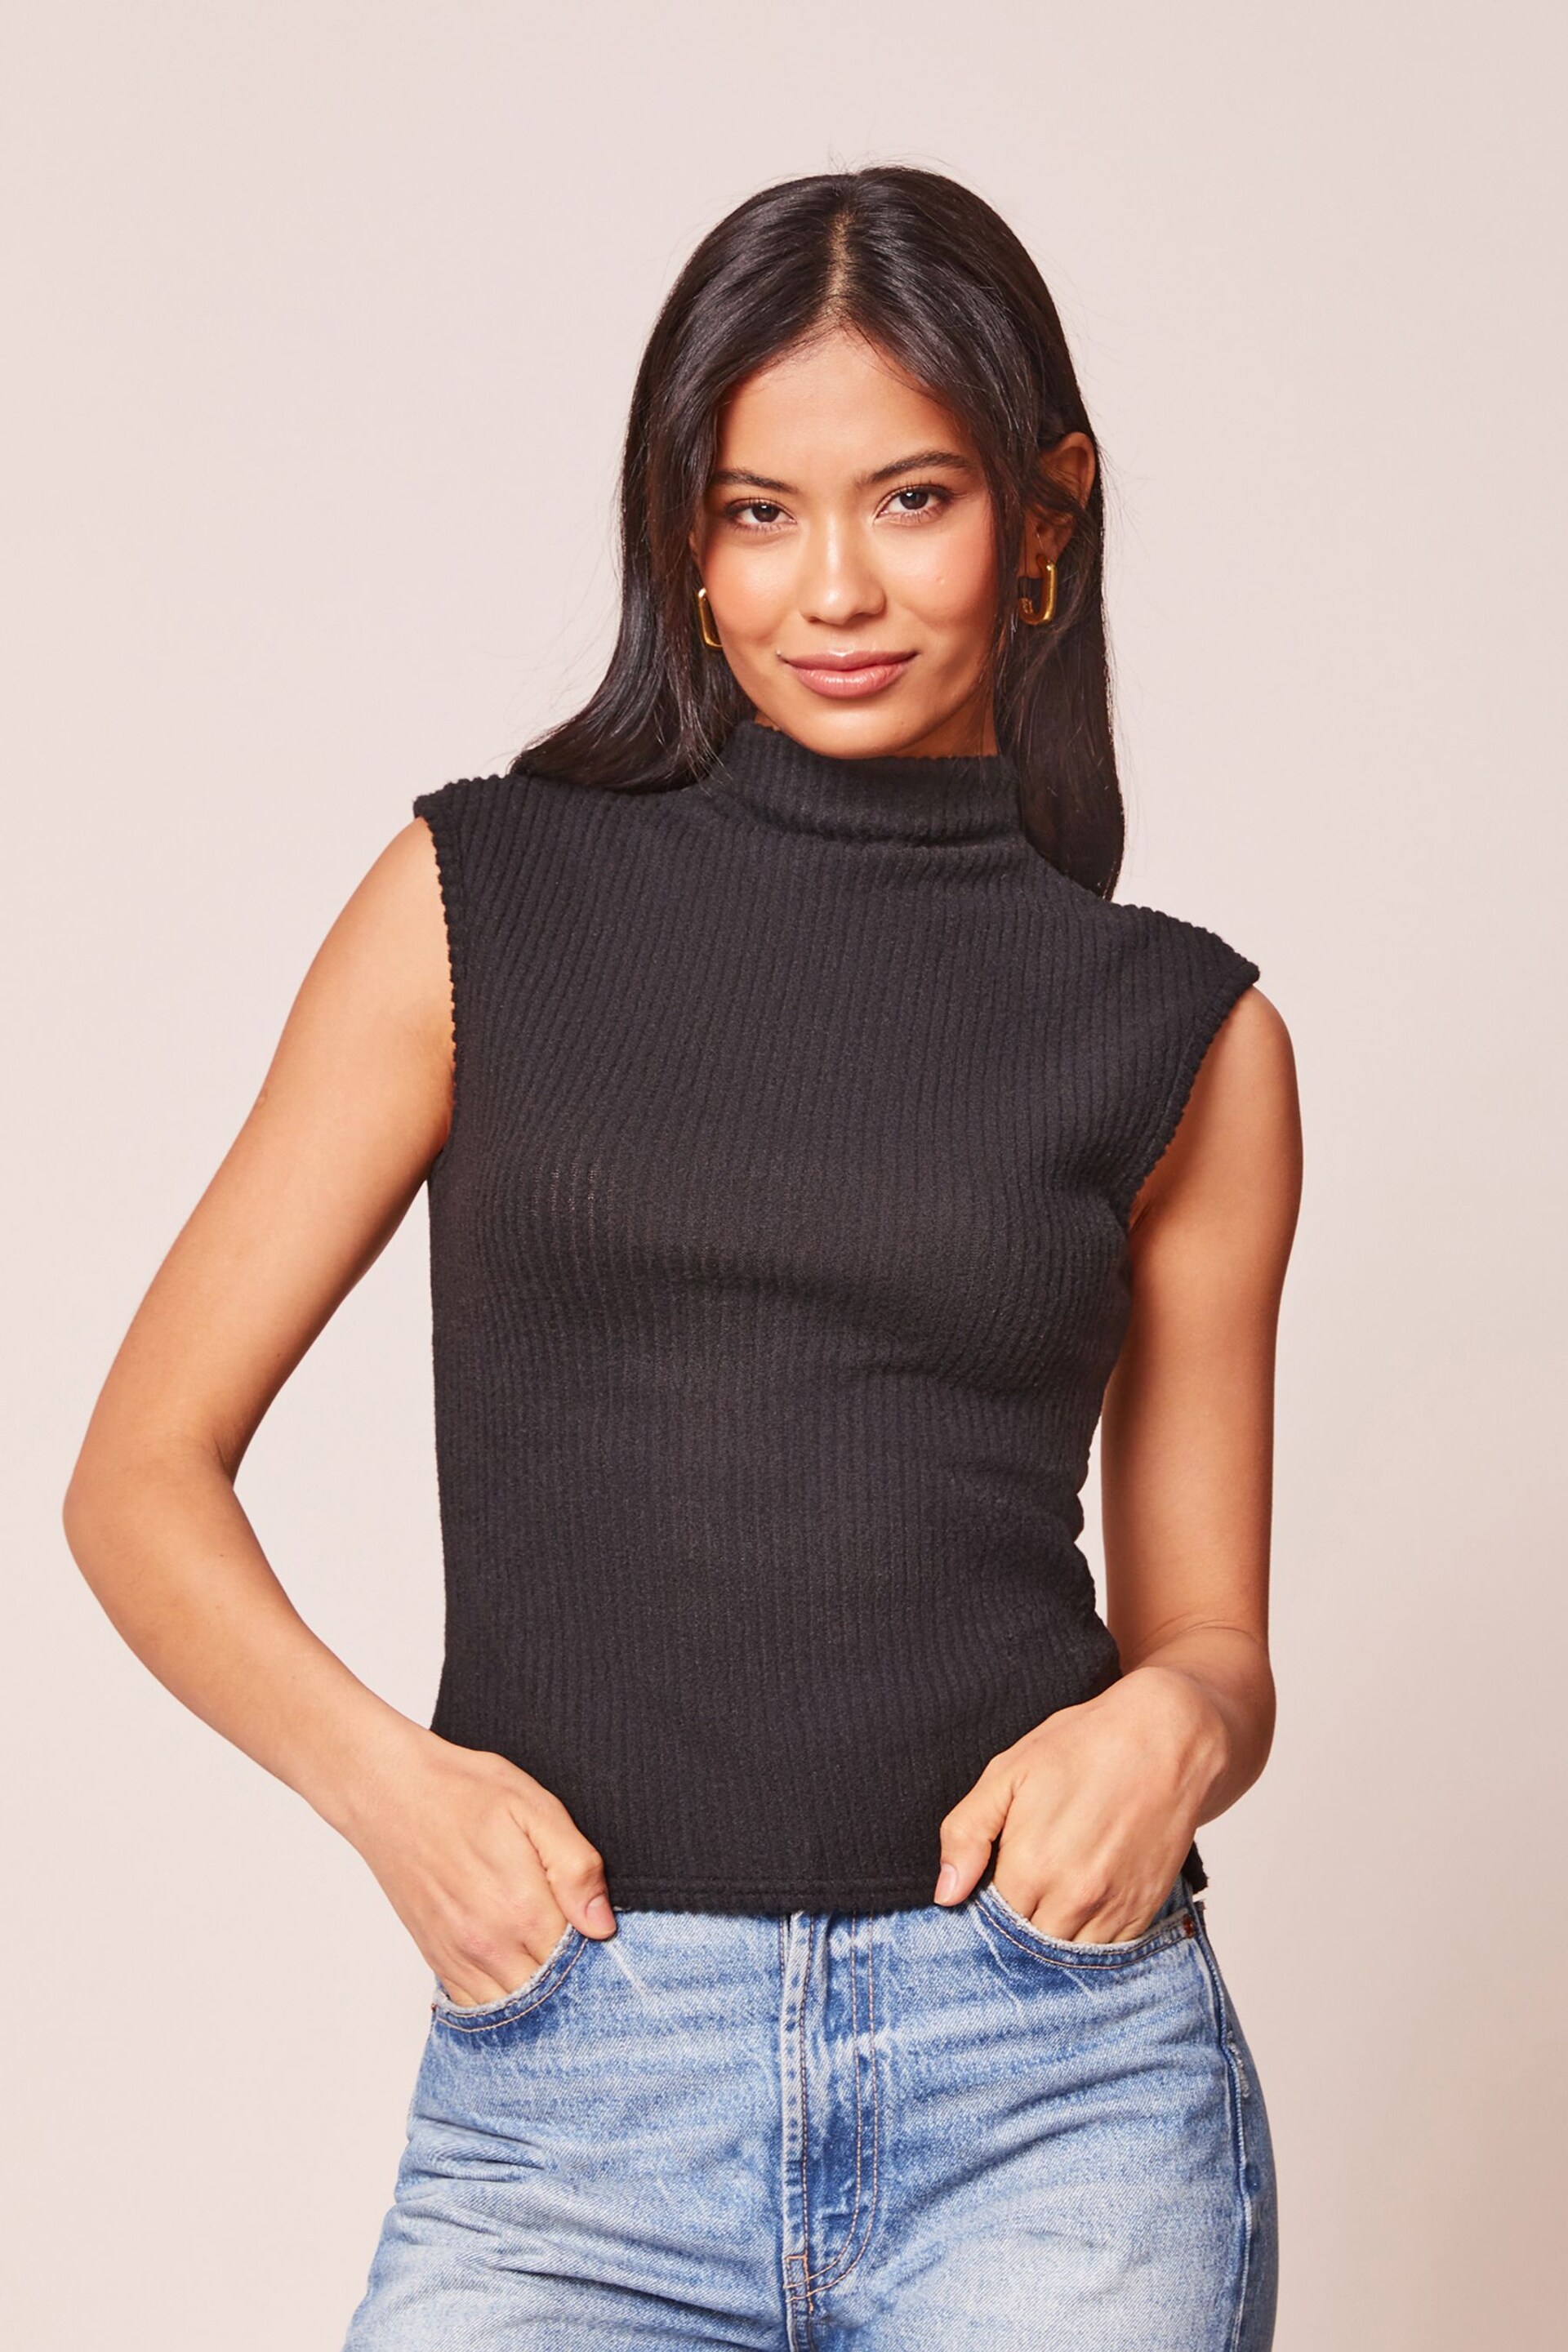 Lipsy Black Cosy High Neck Knitted Vest Top - Image 1 of 4